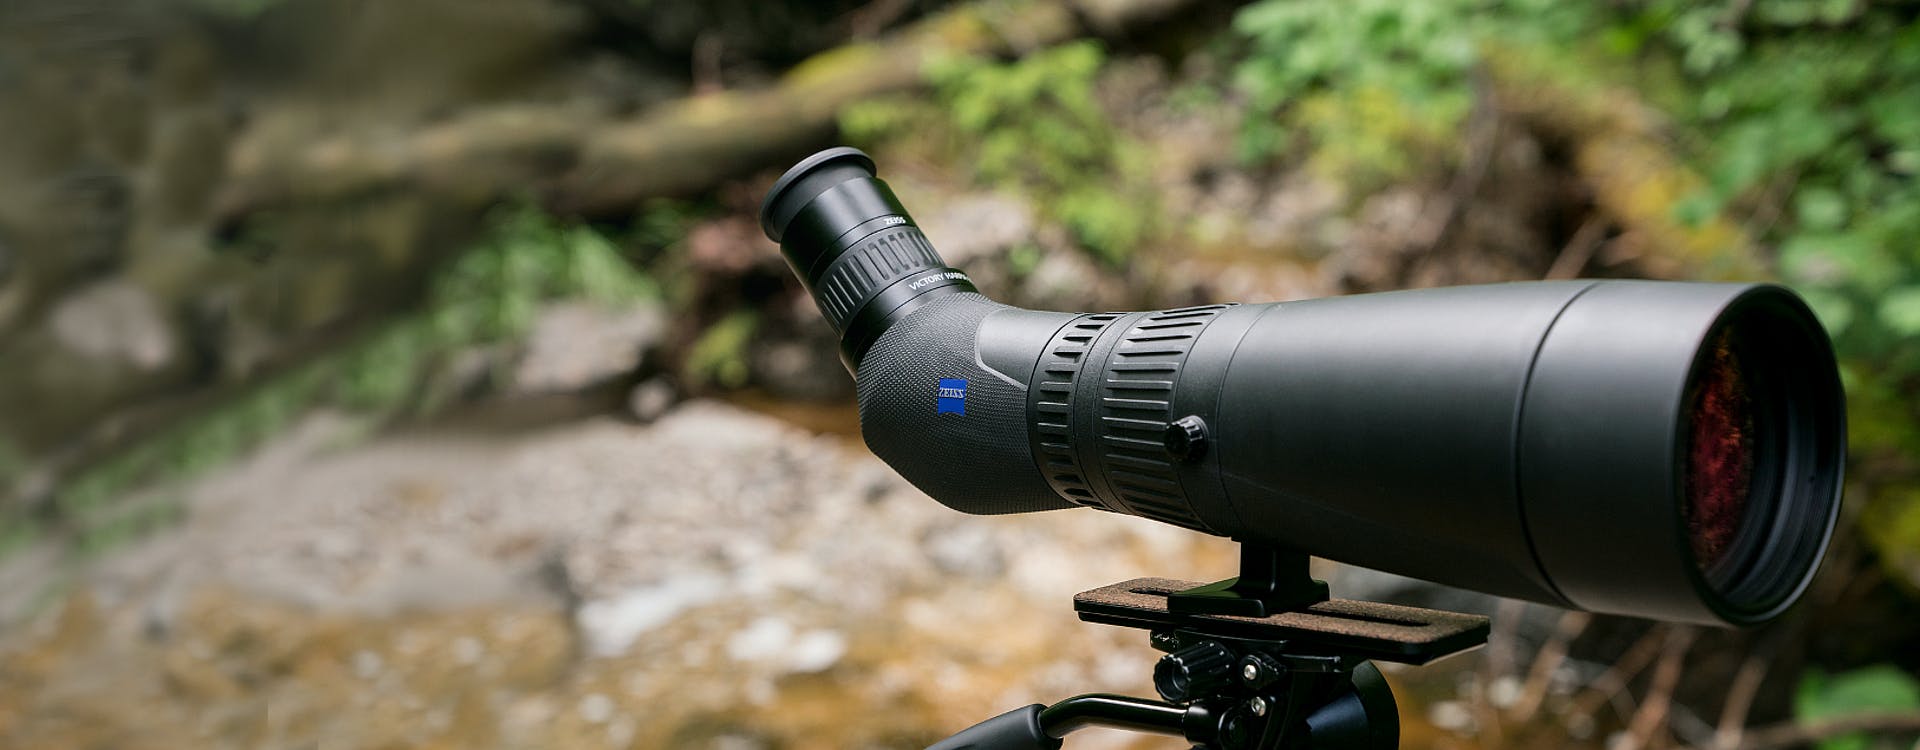 Zeiss Victory Harpia 85 Spotting Scope - Lifestyle shot of the product in a woodland setting